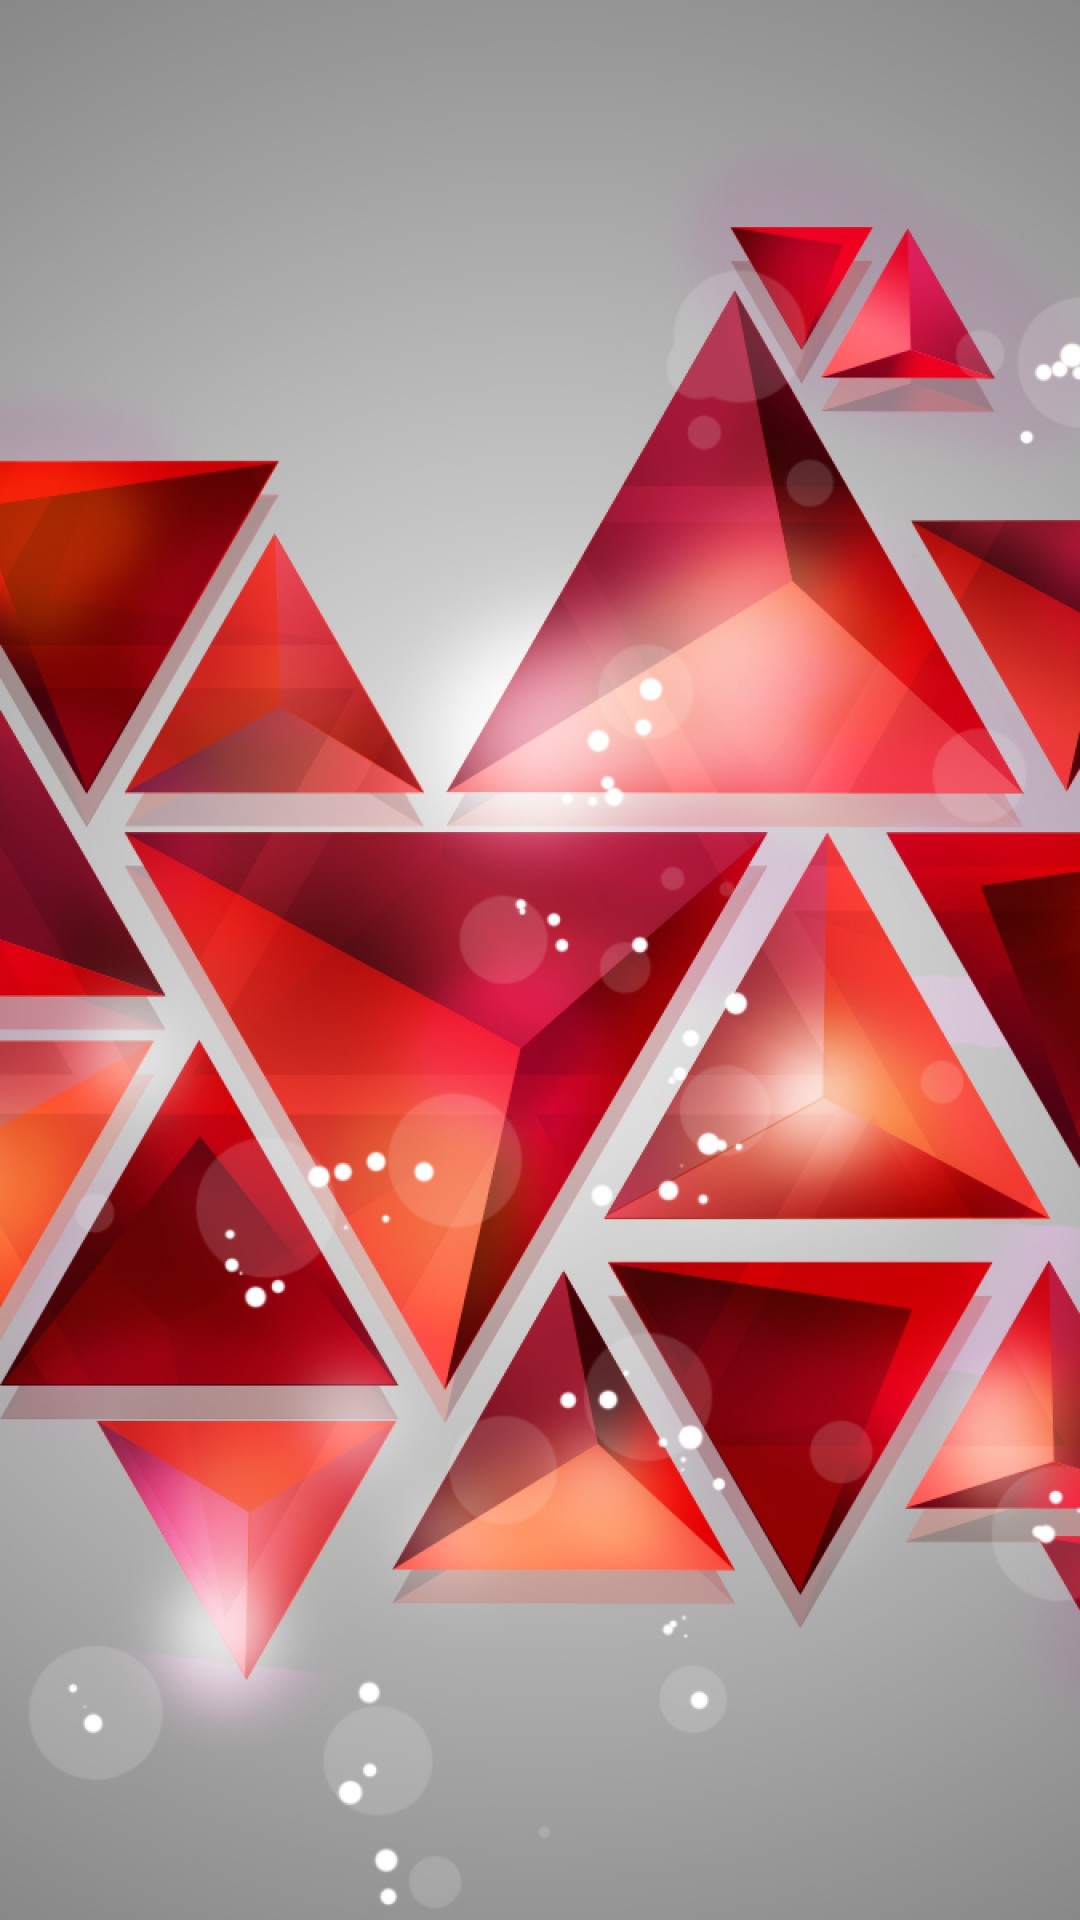 geometric shapes wallpaper,red,triangle,font,text,illustration